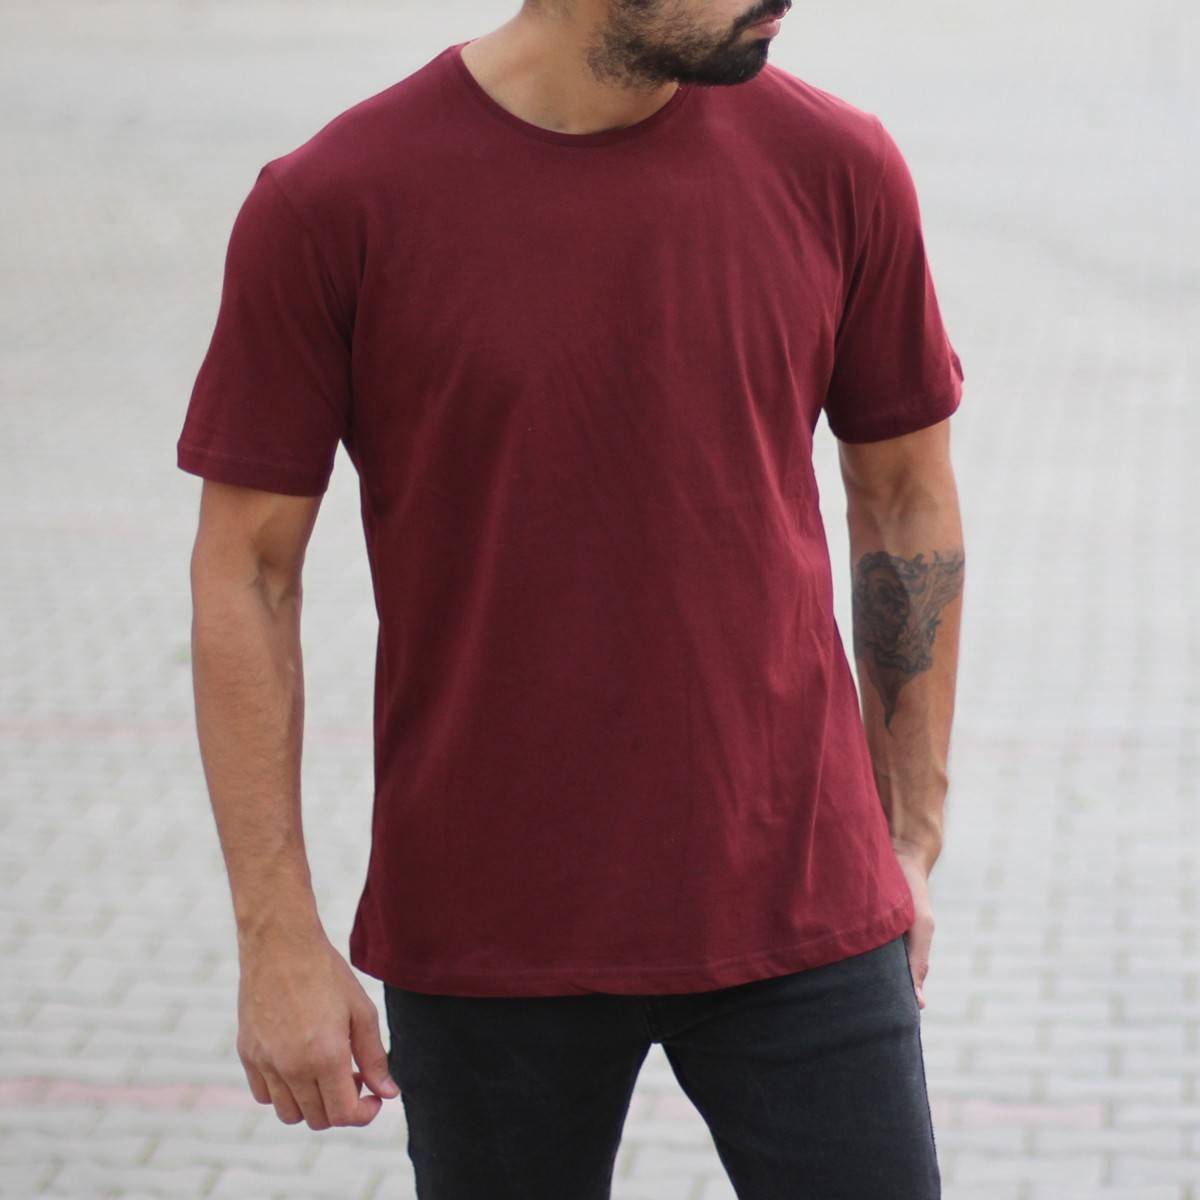 red shirts for men